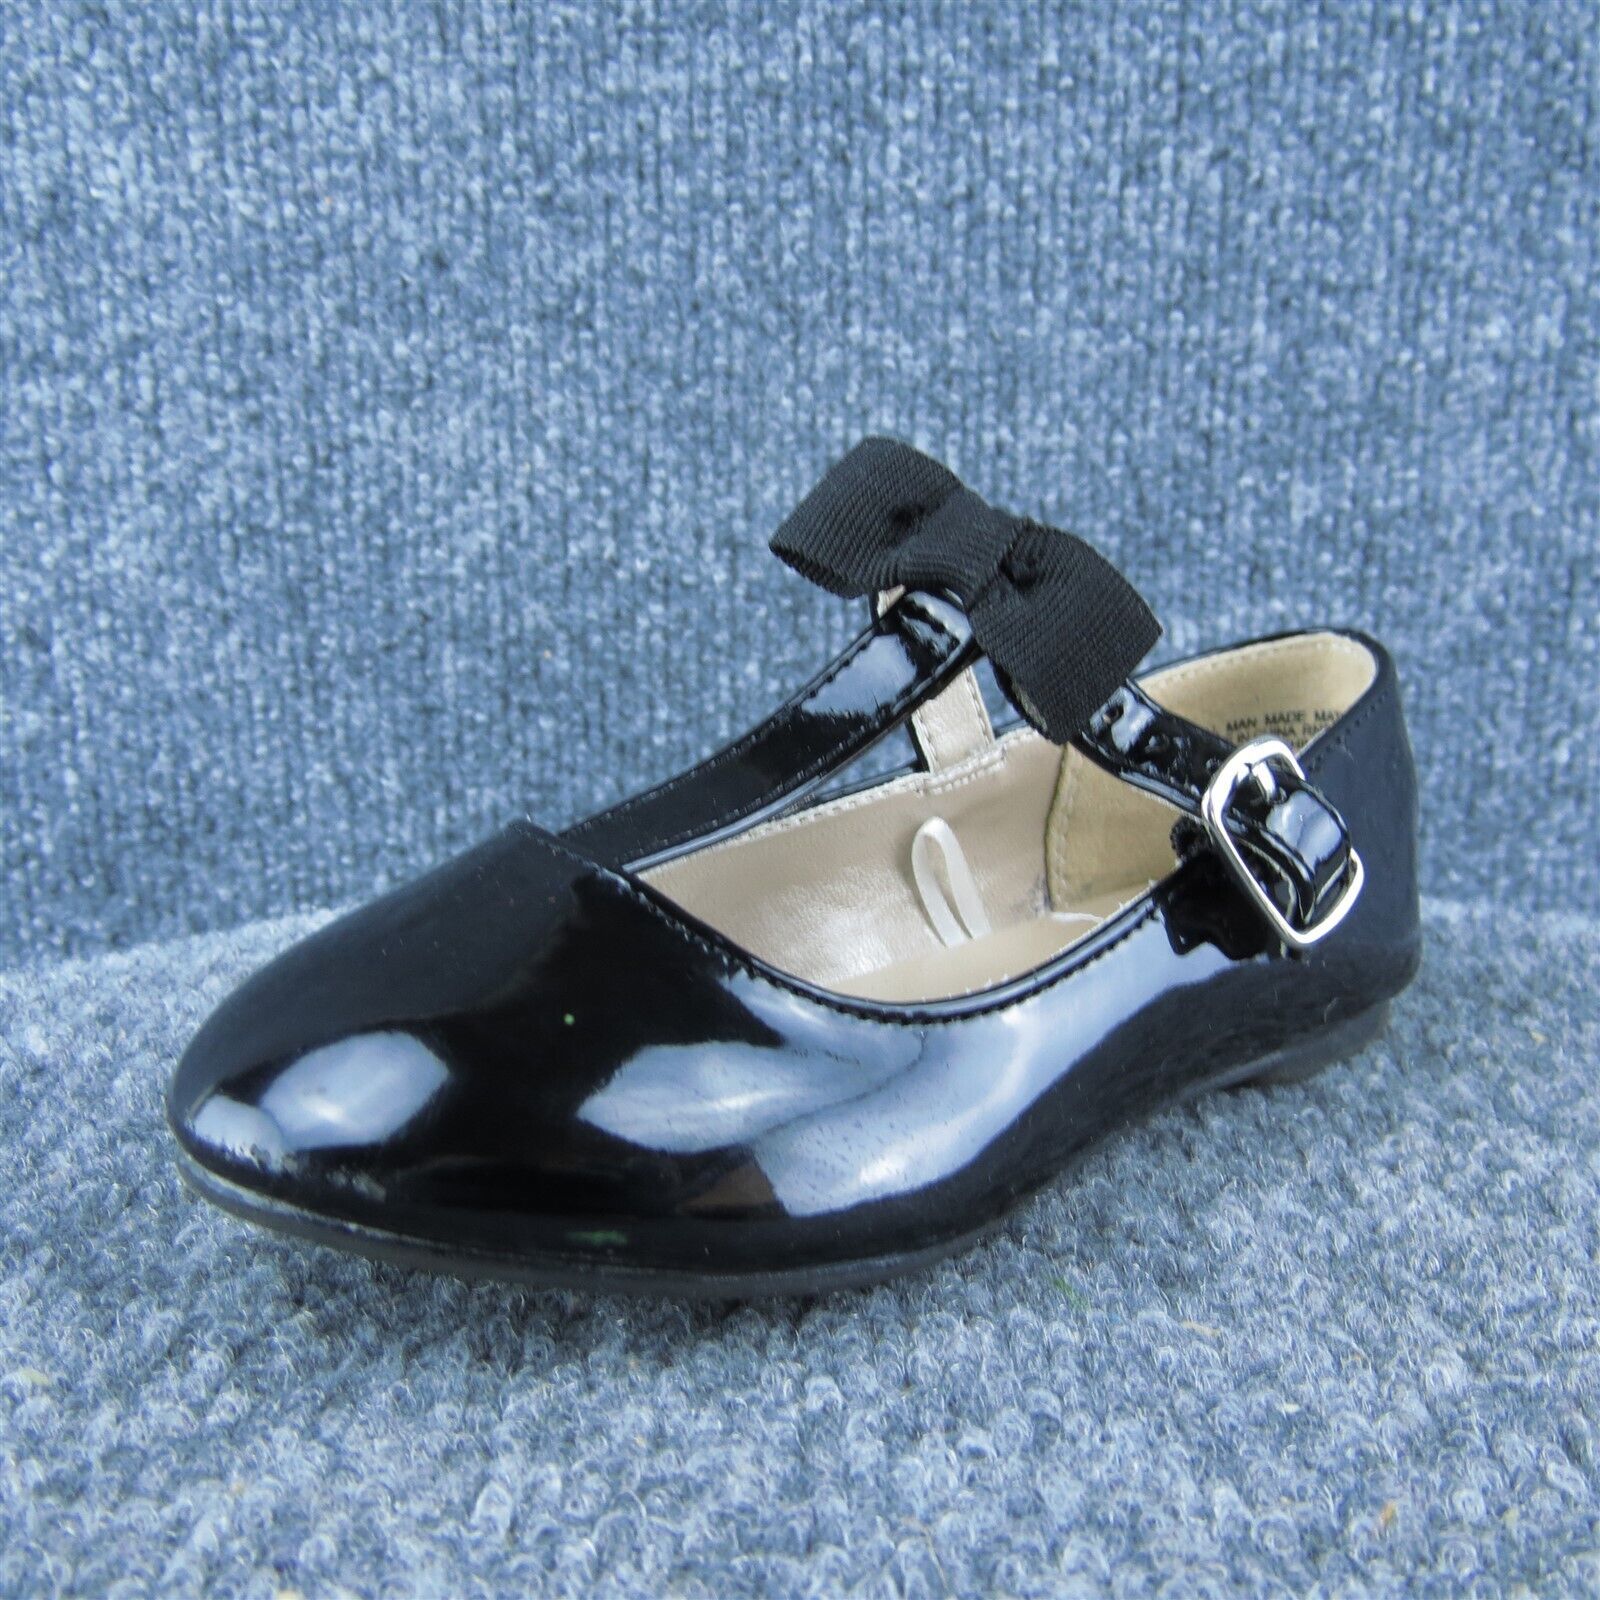 Place Girls Mary Jane Shoes Black Synthetic Buckle Size T 8 Medium - $21.78